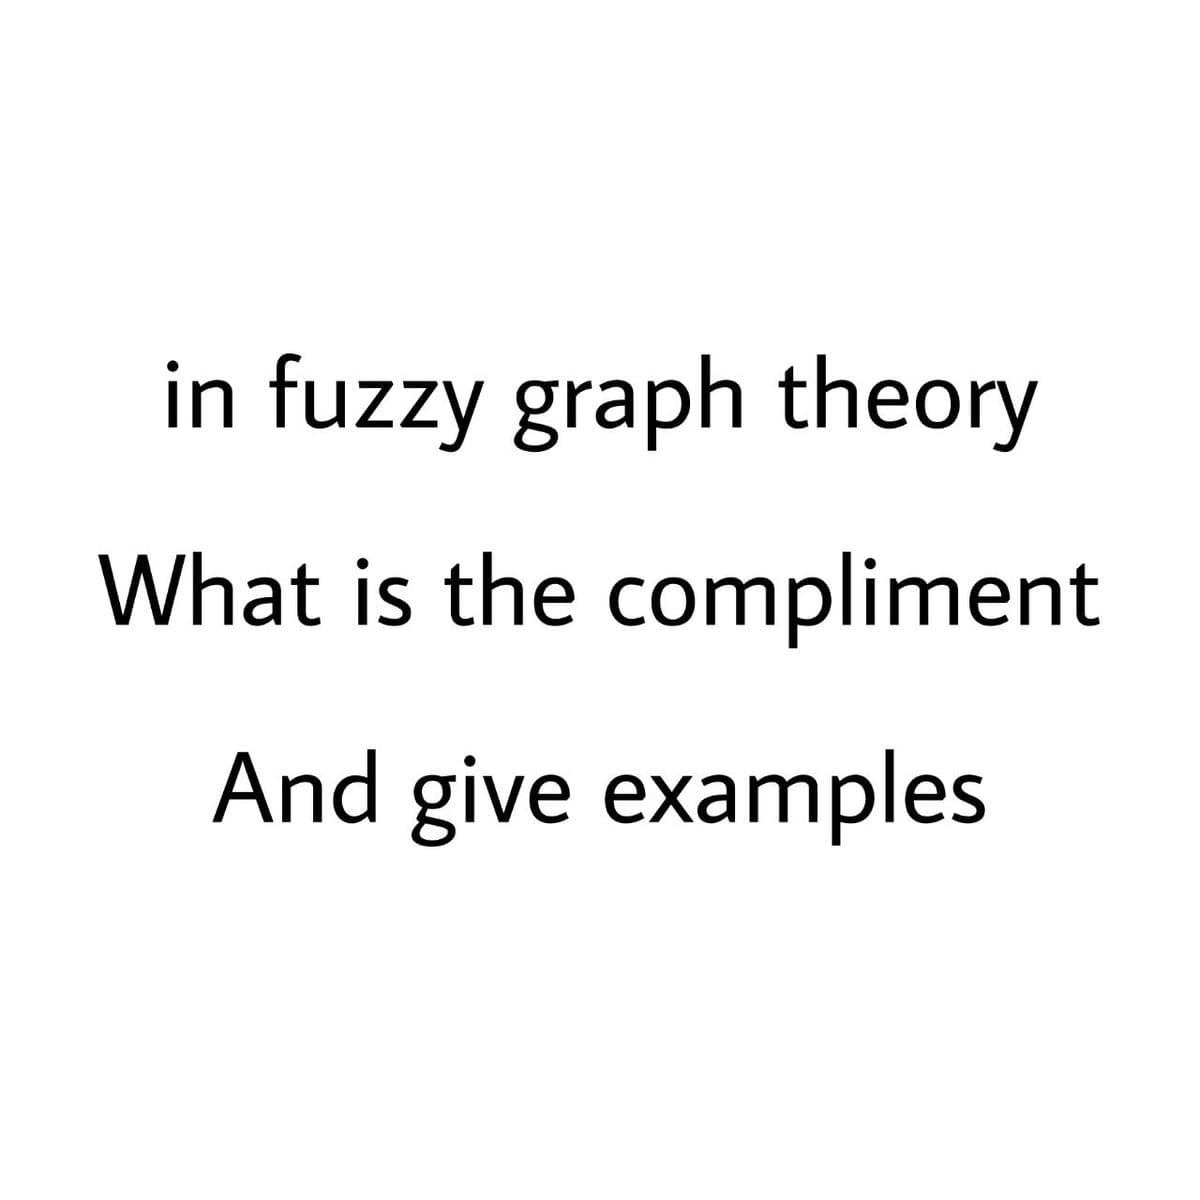 in fuzzy graph theory
What is the compliment
And give examples
